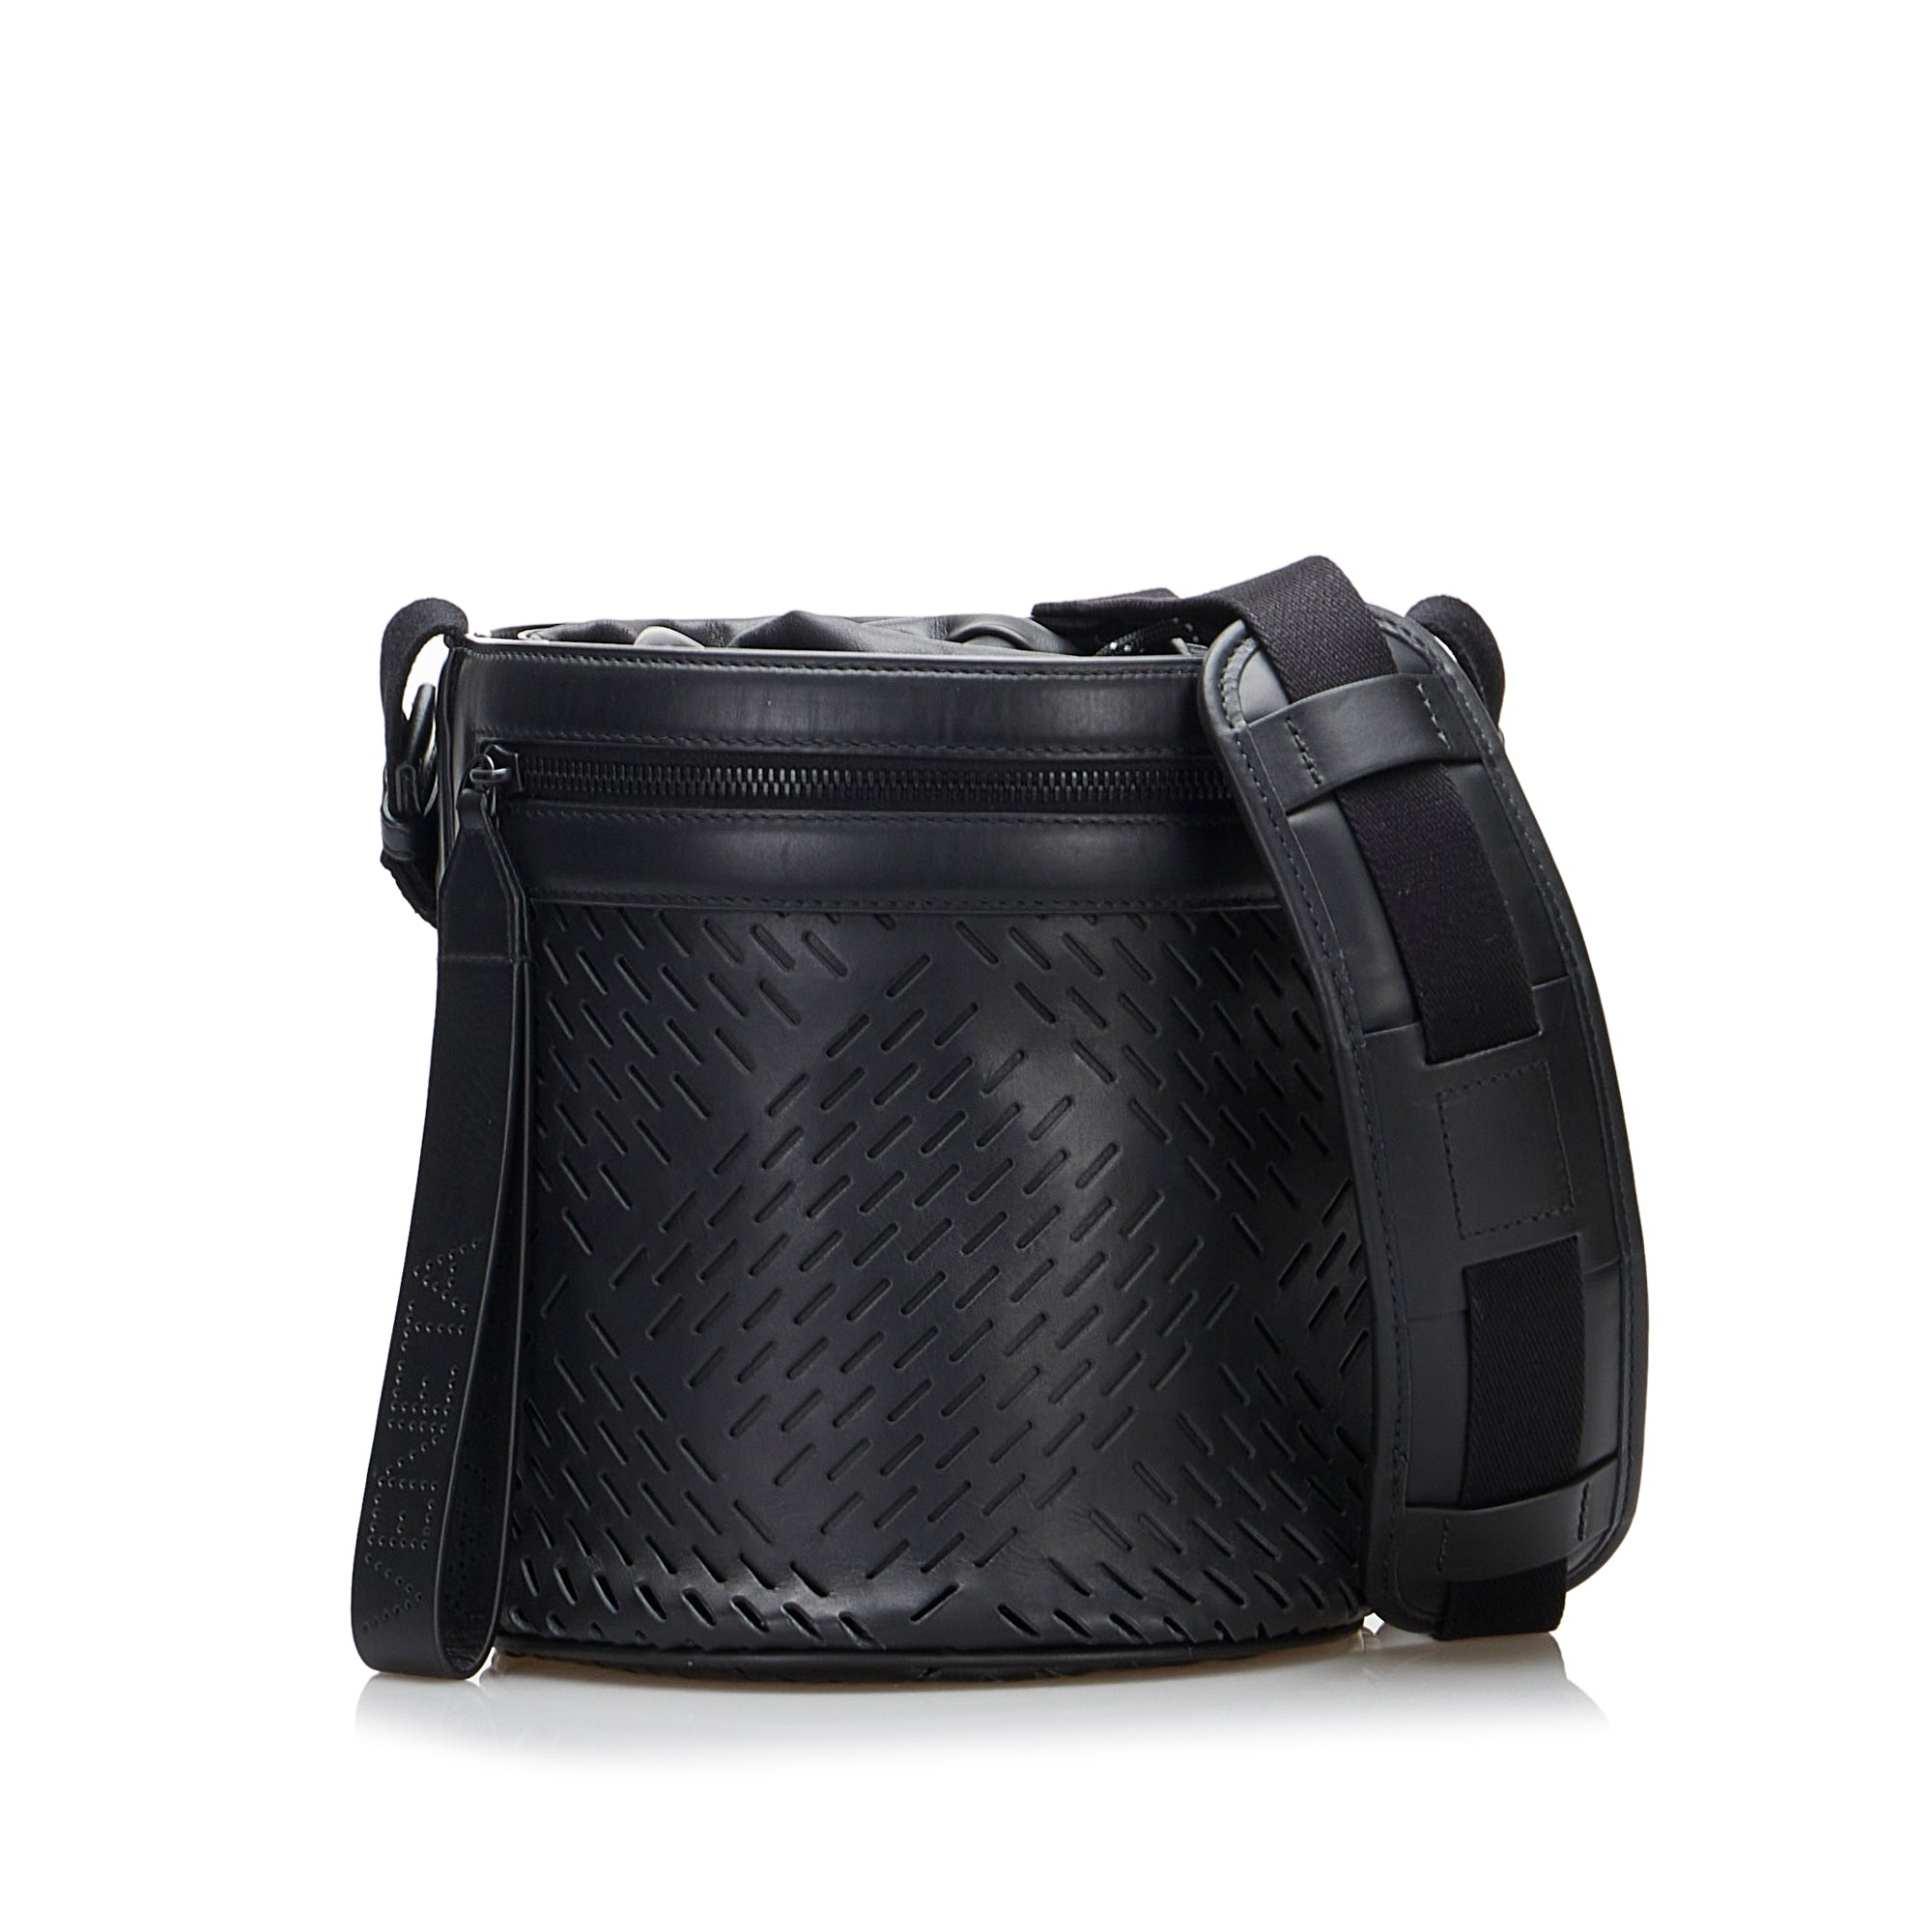 Louis Vuitton Perforated Leather Bucket Bag Black - THE PURSE AFFAIR